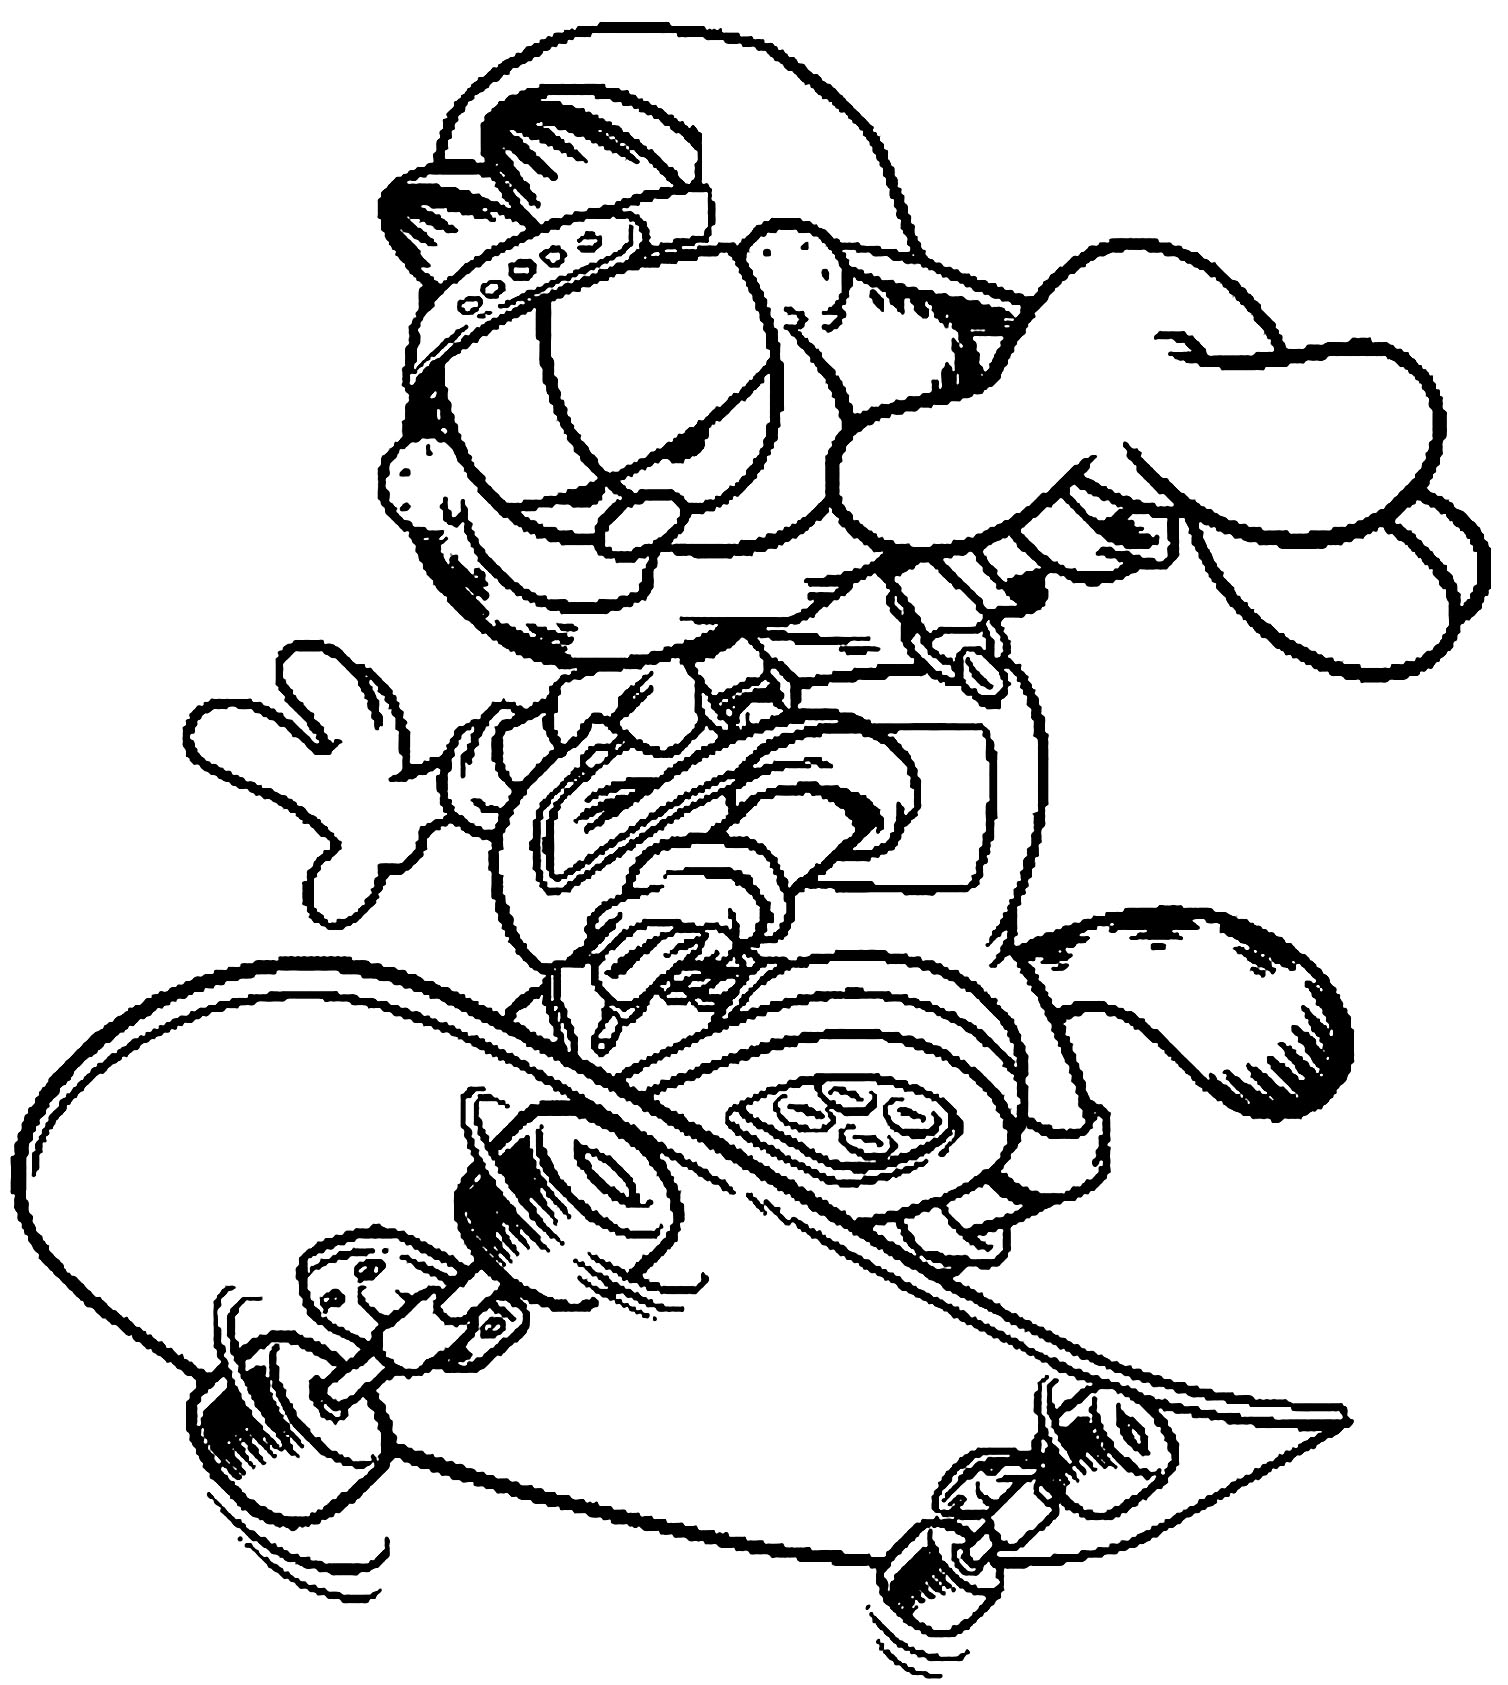 Garfield coloring pages for kids - Garfield Kids Coloring Pages